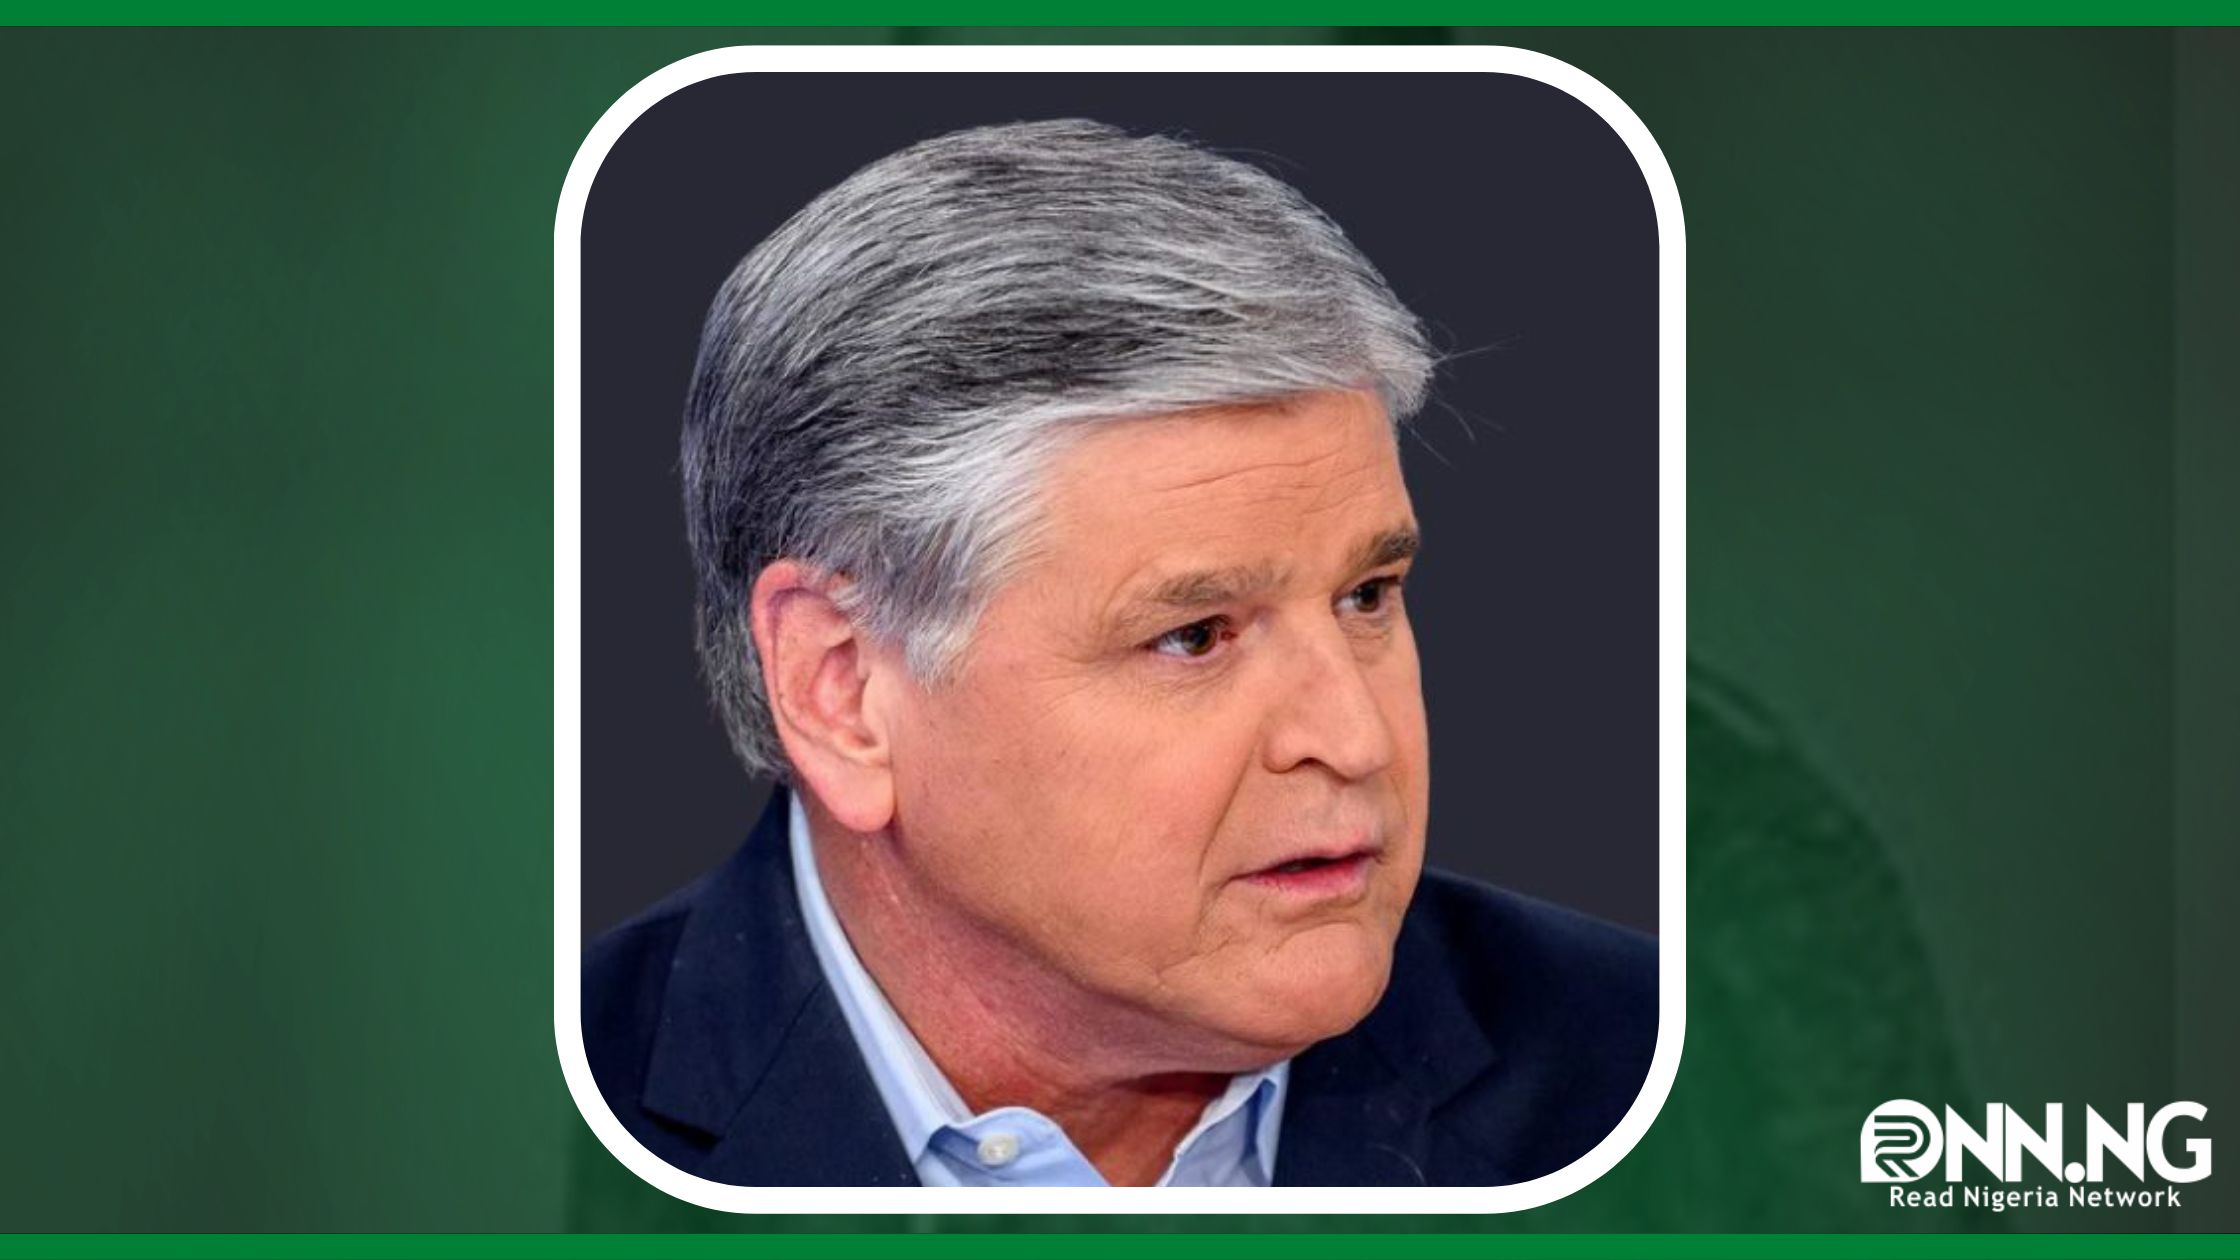 Sean Hannity Biography And Net Worth